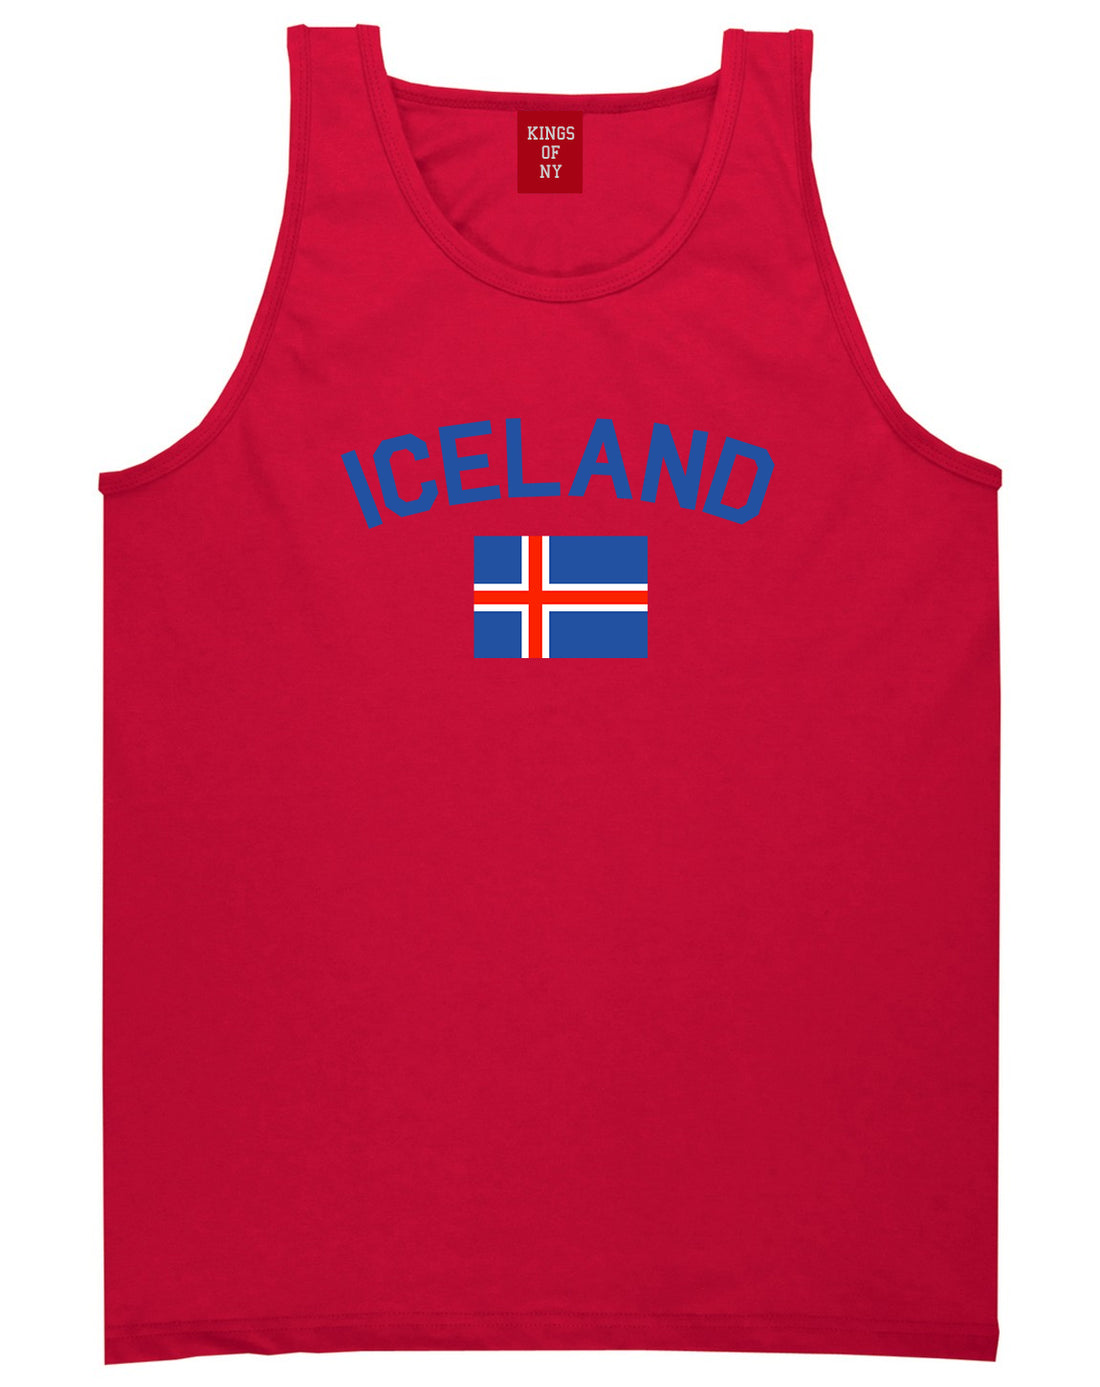 Iceland With Icelandic Flag Souvenir Mens Tank Top Shirt Red